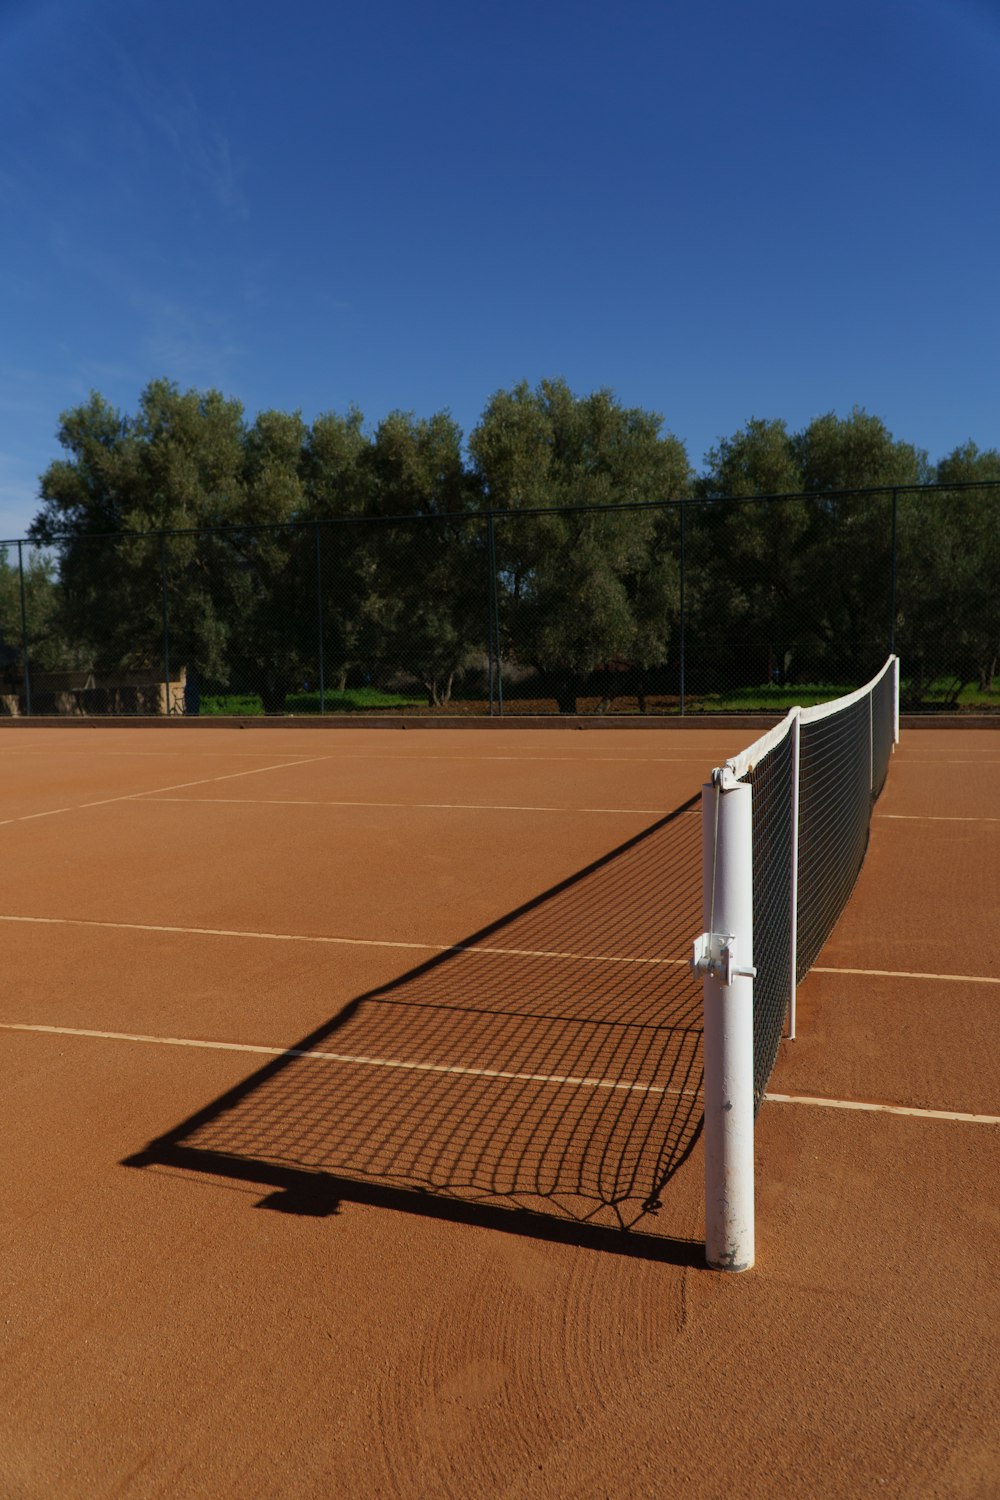 a tennis court with a net and trees in the background